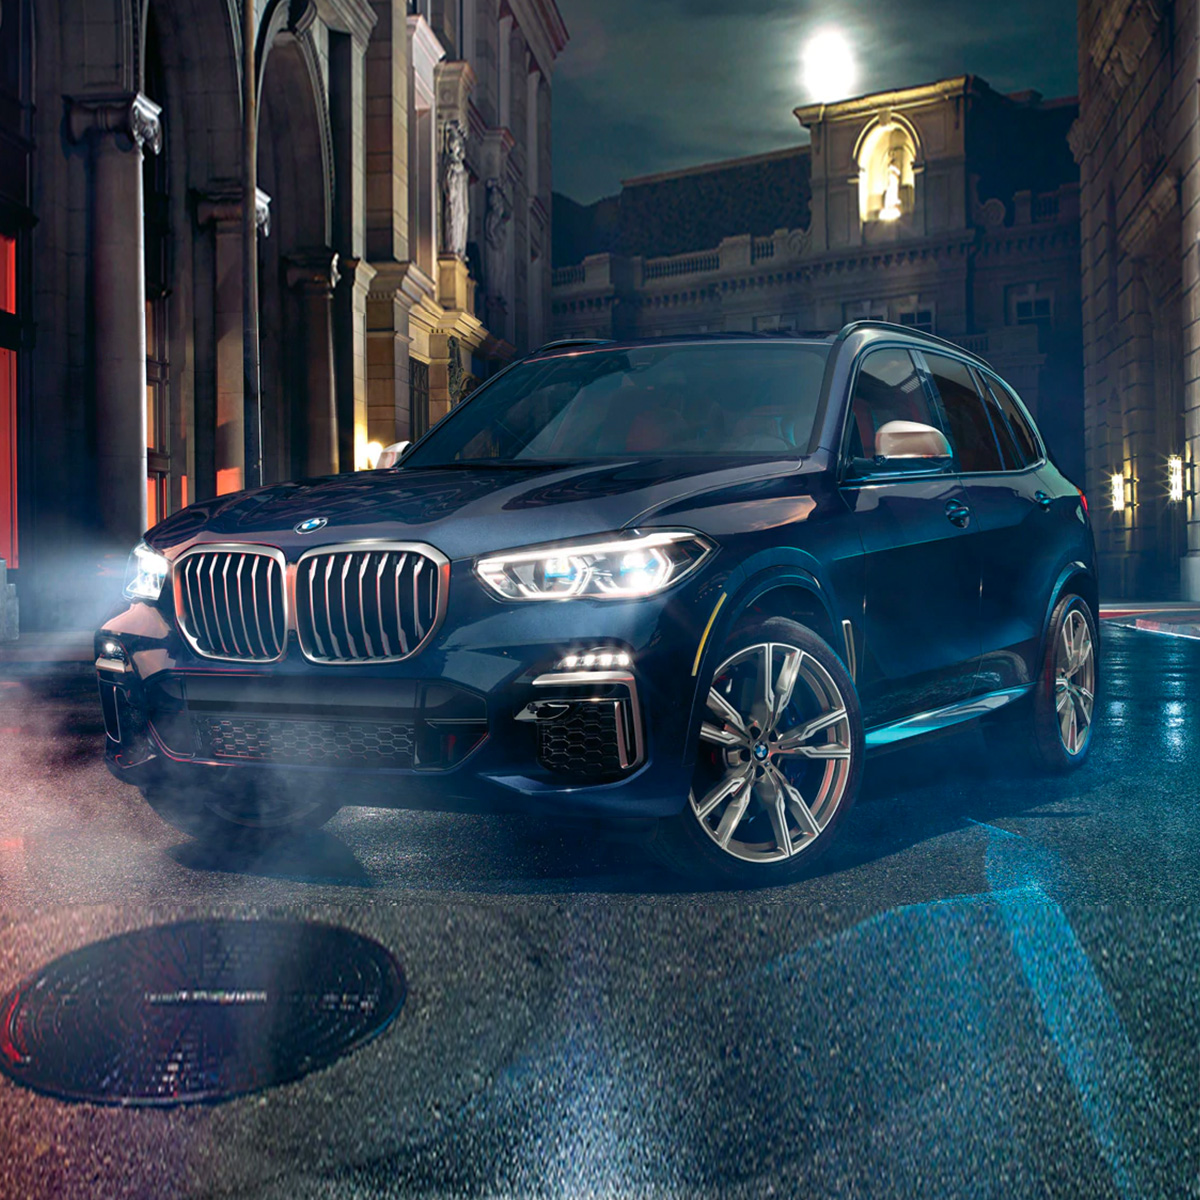 bmw black suv with headlights on parked on street